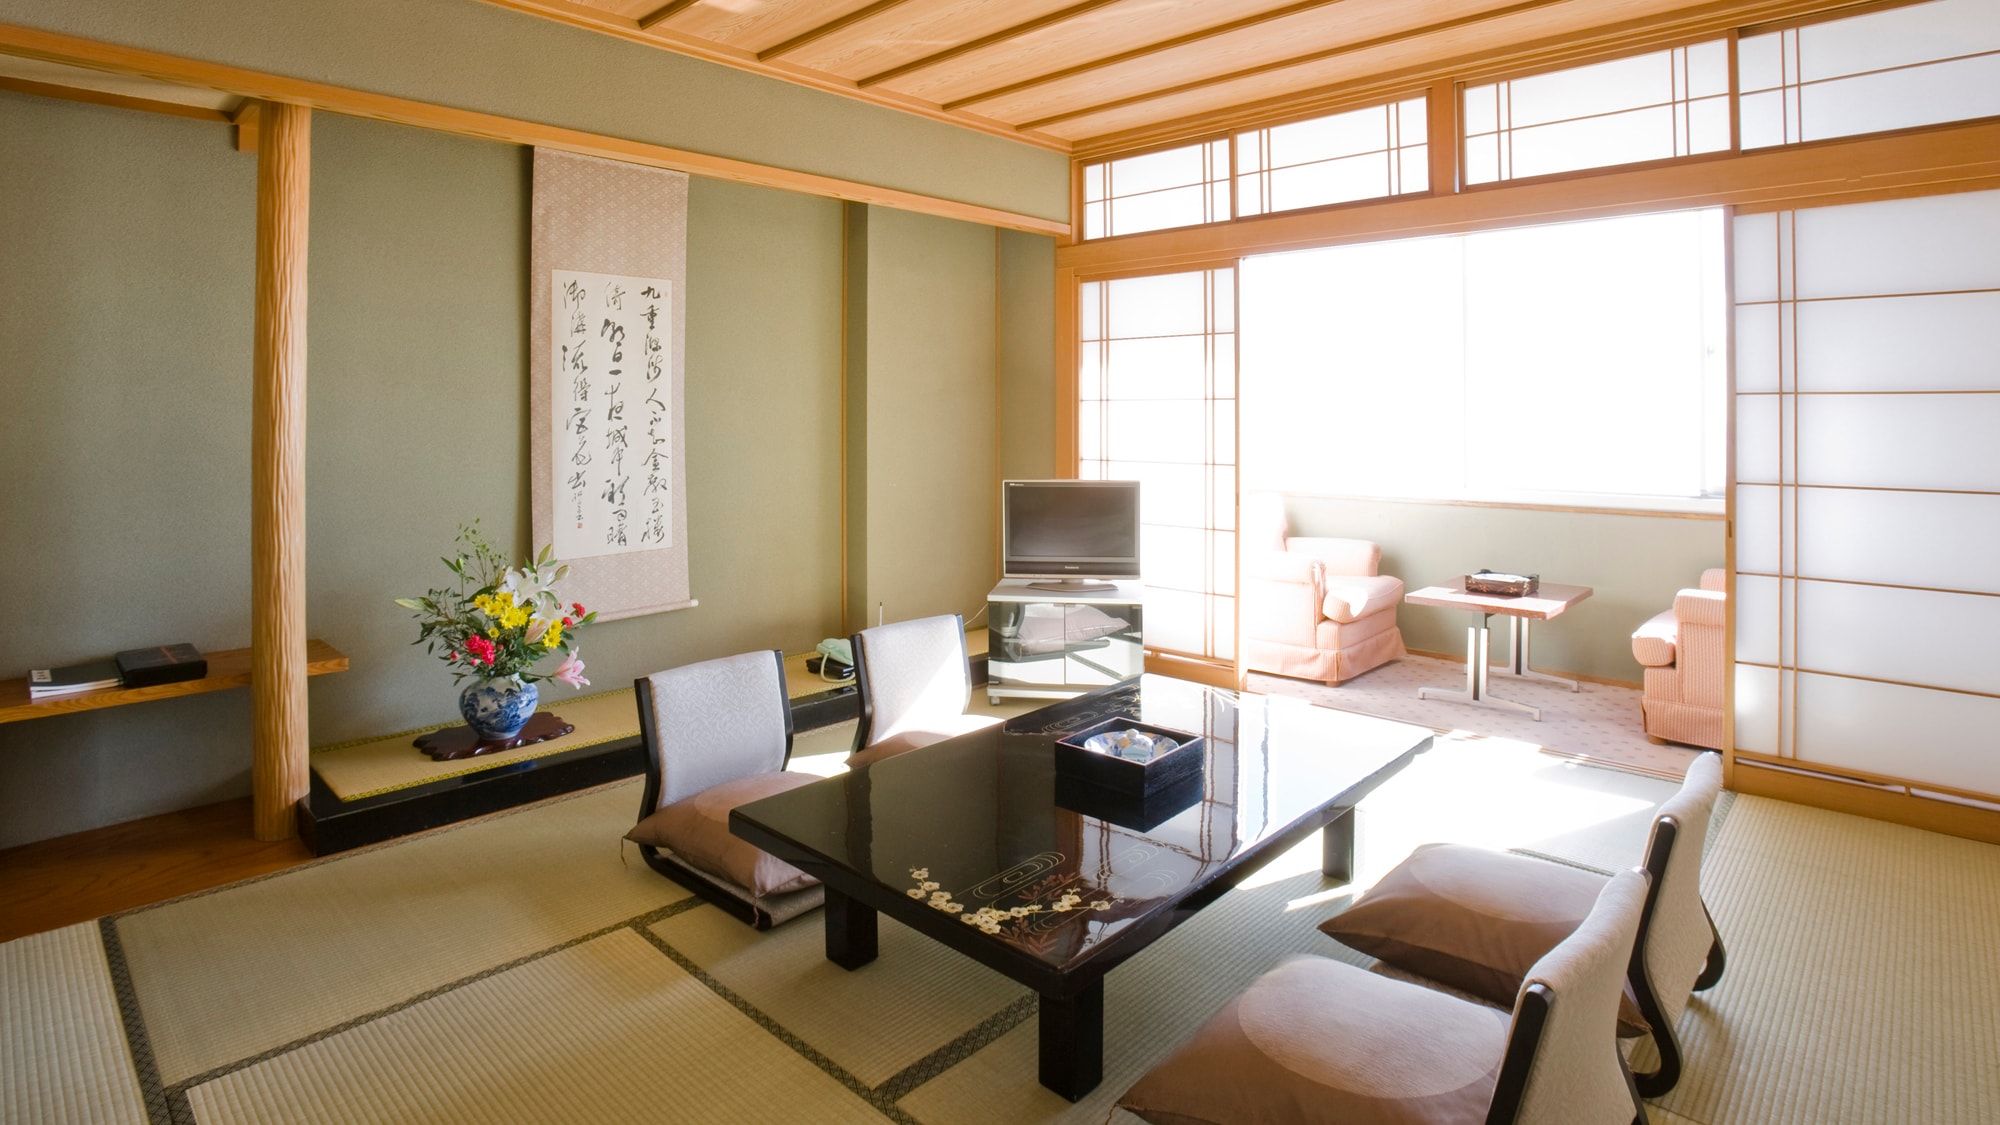 ◆[Special room 10 tatami mats + twin] A special room overlooking Mikawa Bay, where the Showa Emperor and Empress stayed.